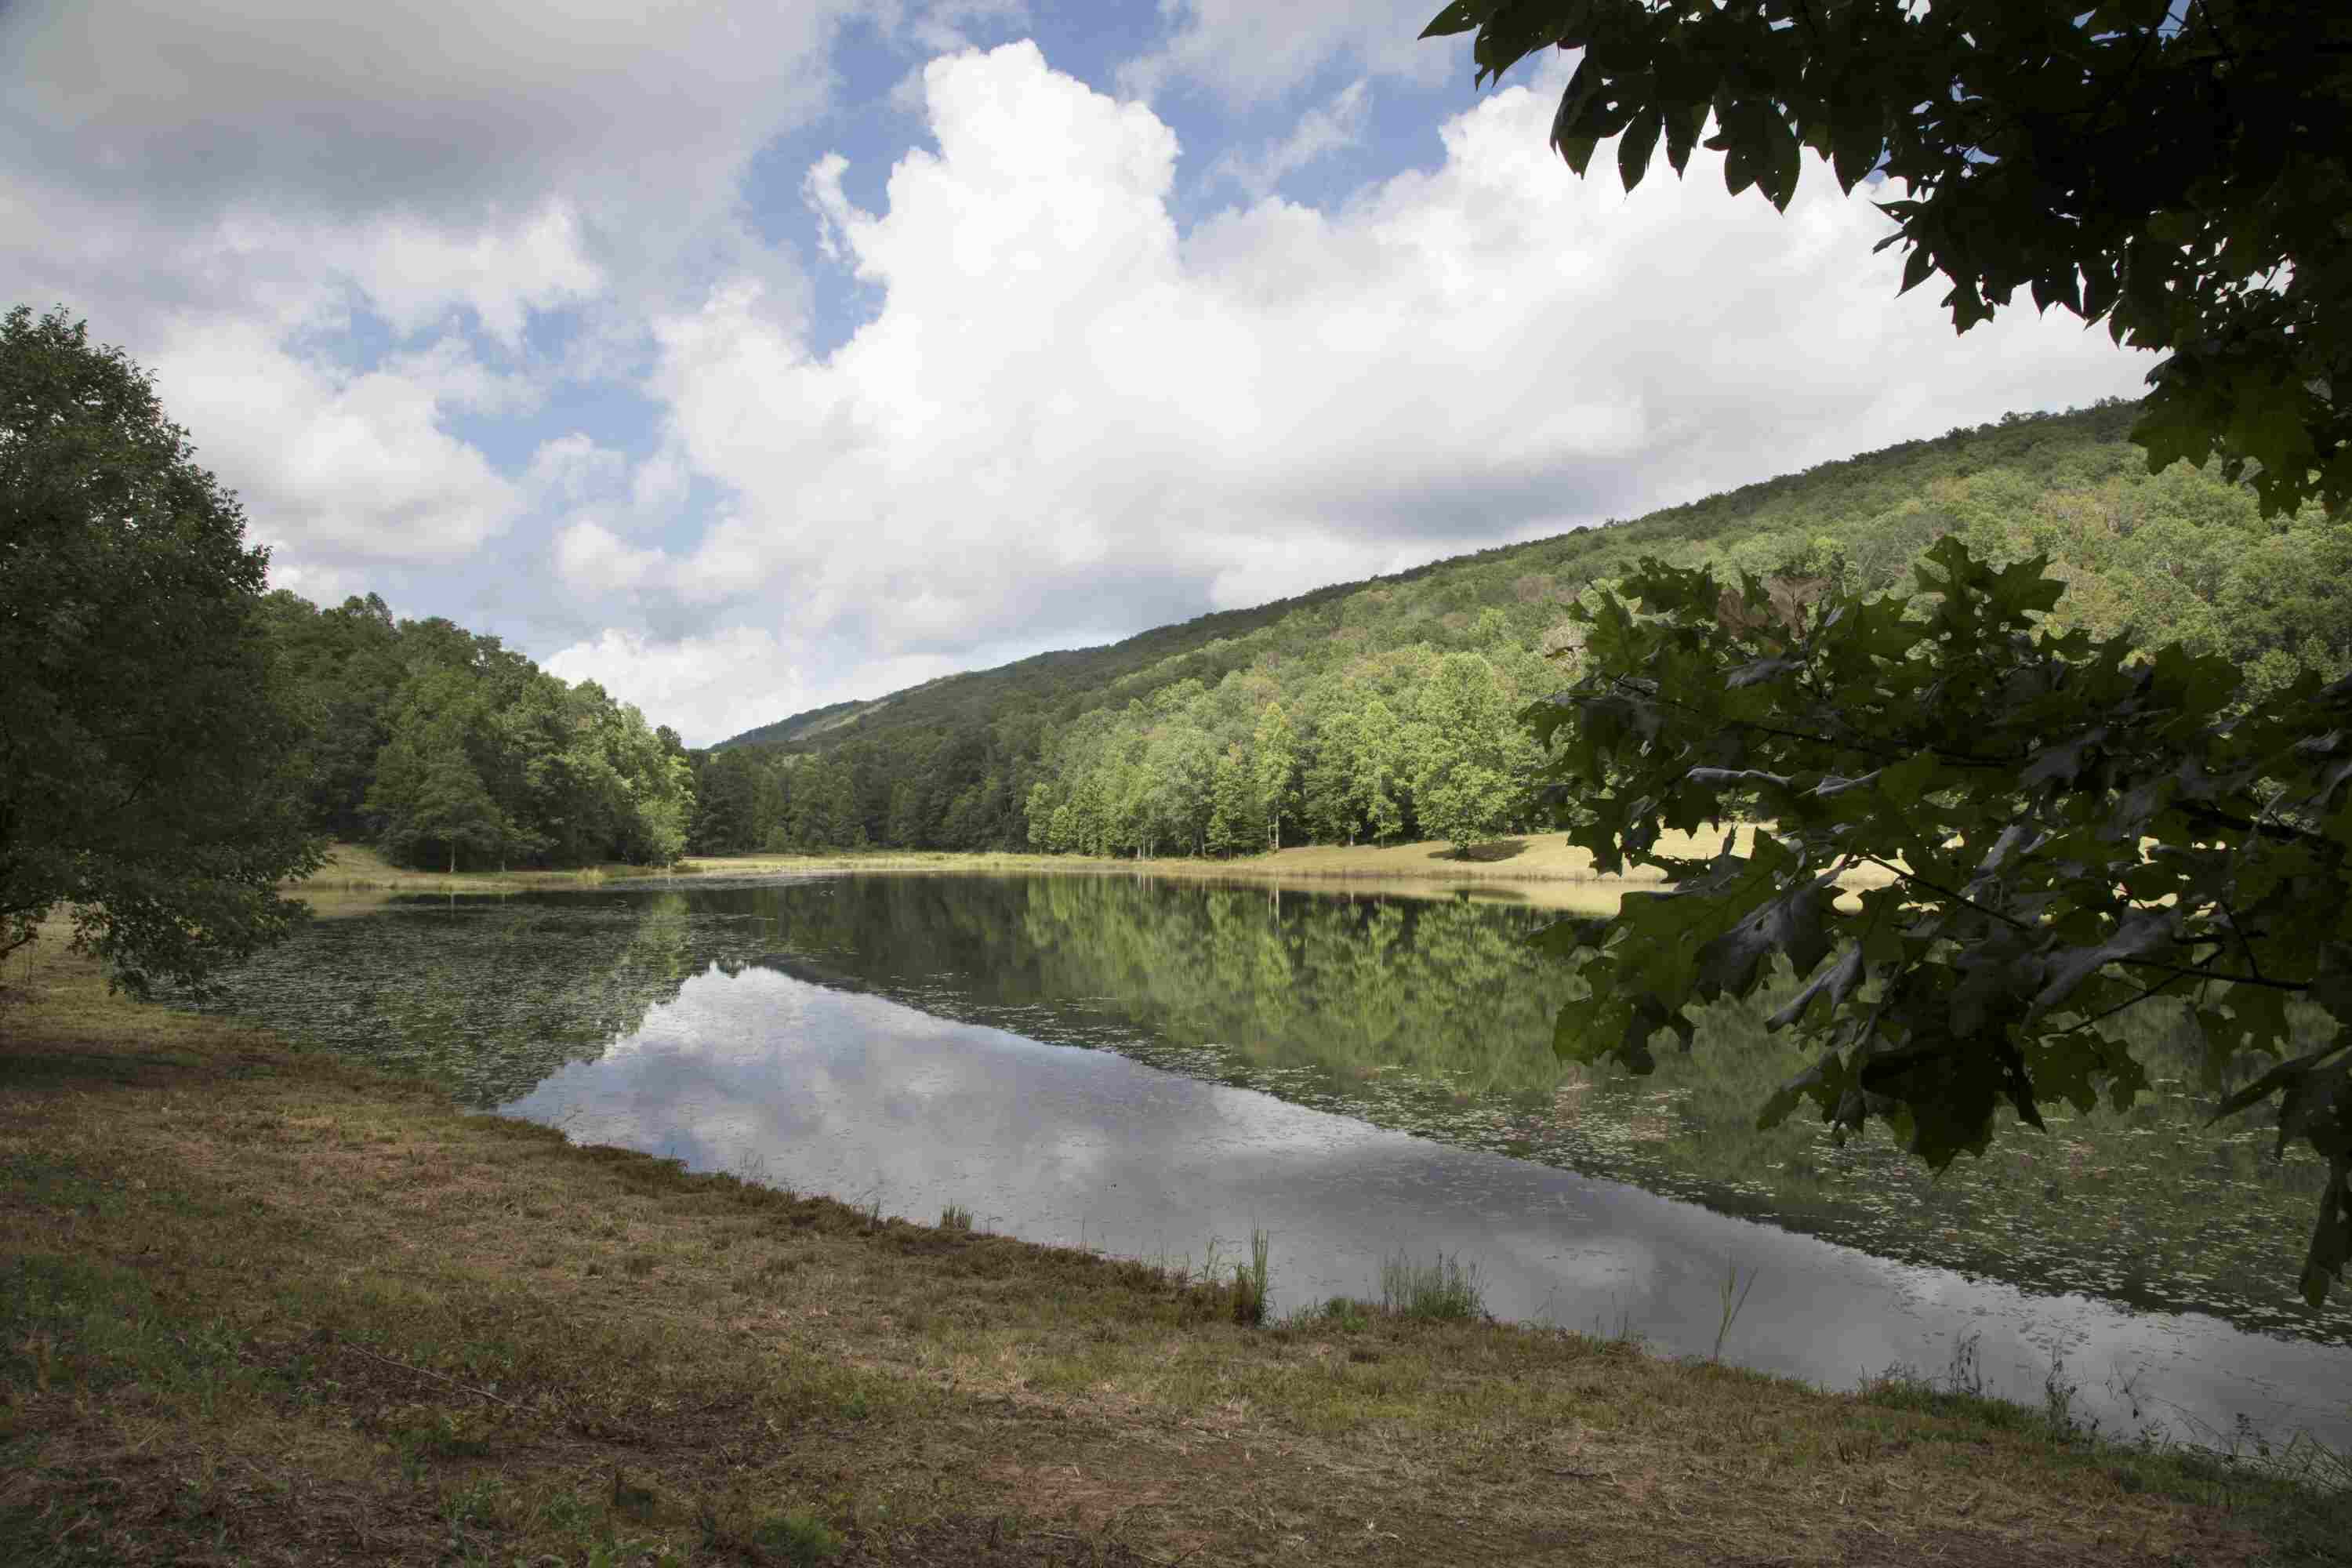 A view of the 10 ac lake looking northwest